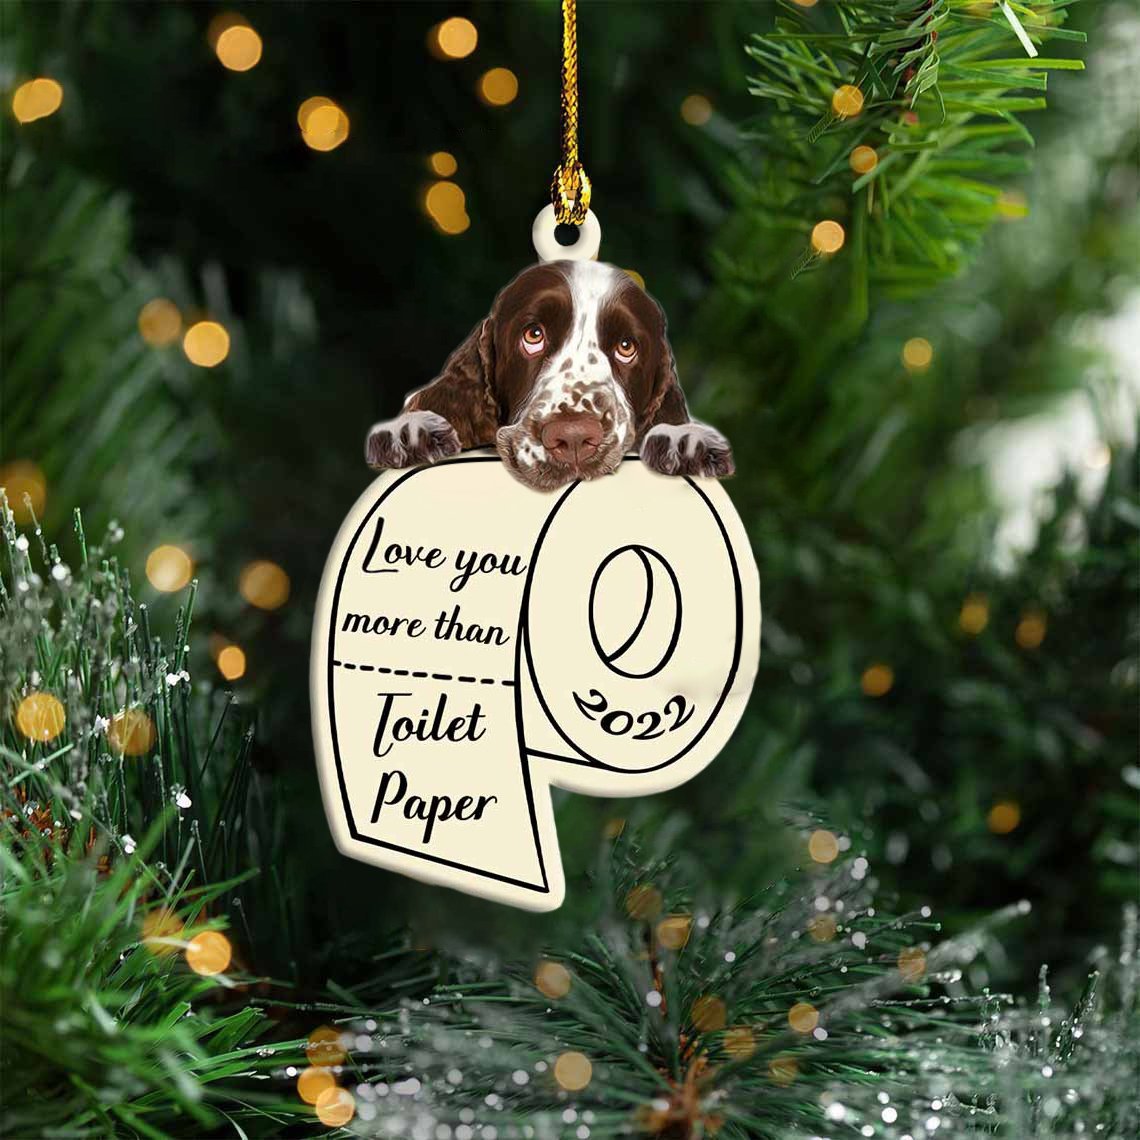 English Springer Spaniel Love You More Than Toilet Paper 2022 Hanging Ornament